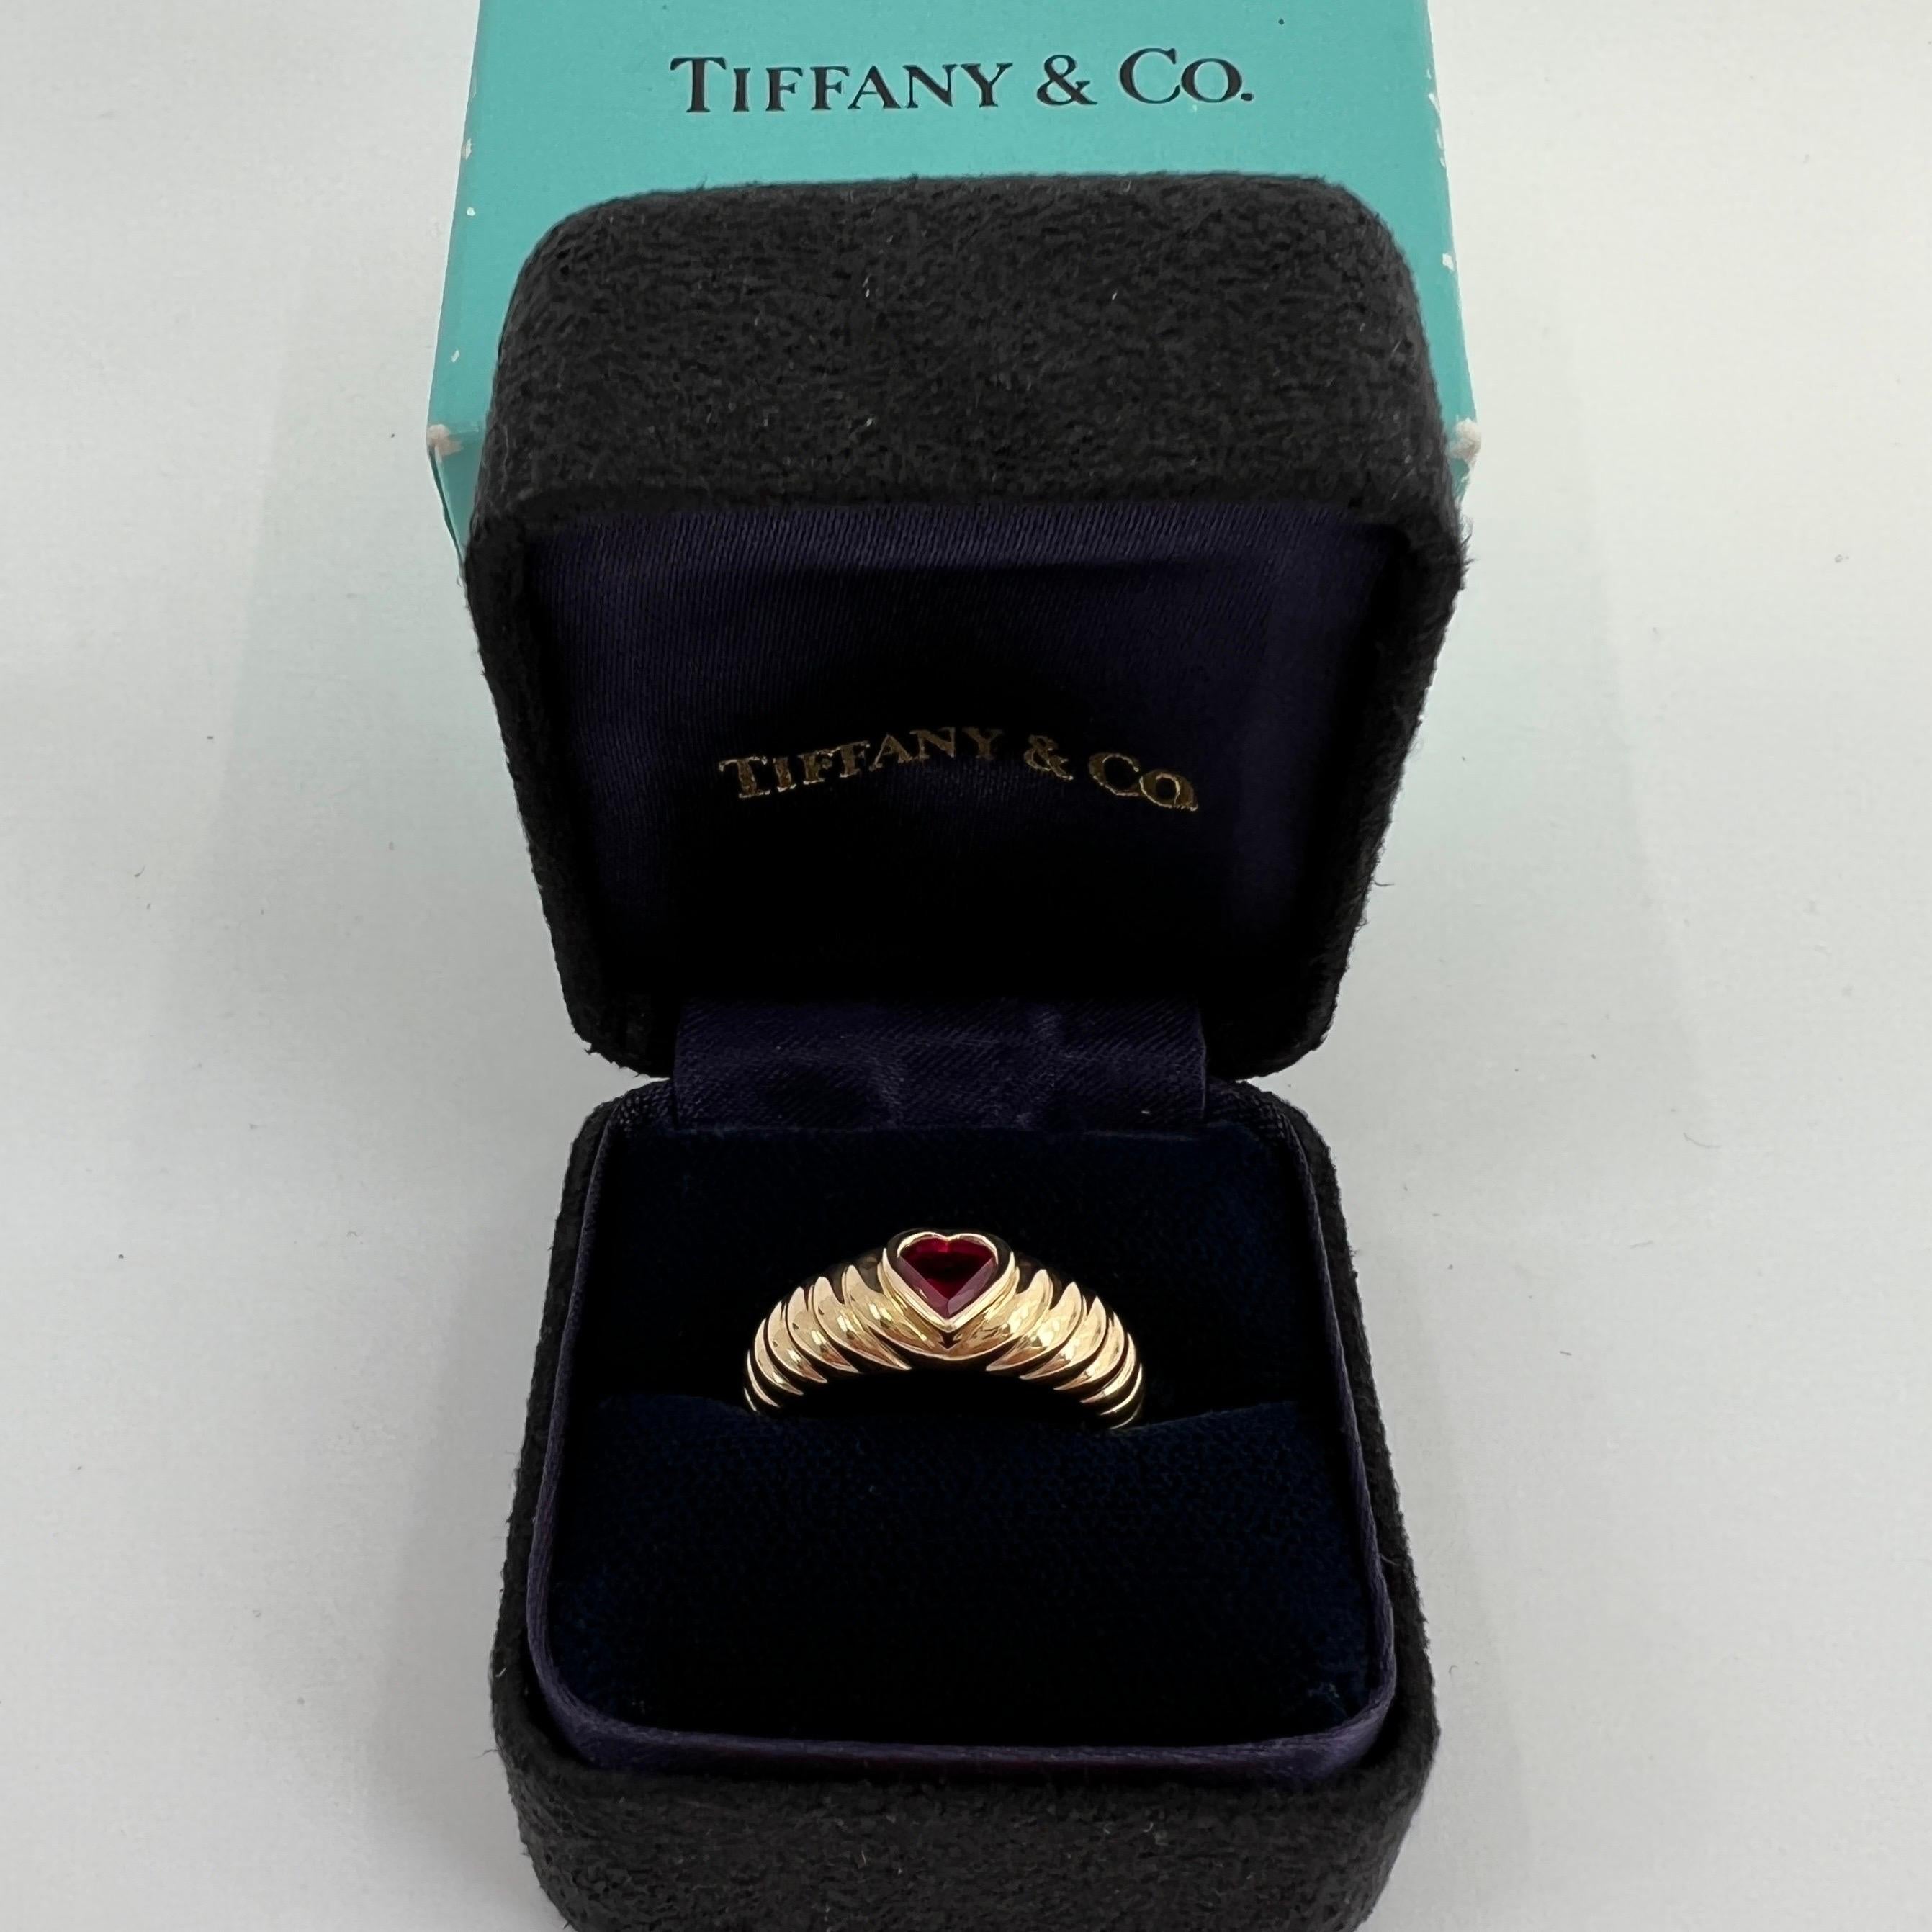 Fine Tiffany & Co. Vivid Blood Red Ruby Heart Cut 18k Yellow Gold Band Ring 4